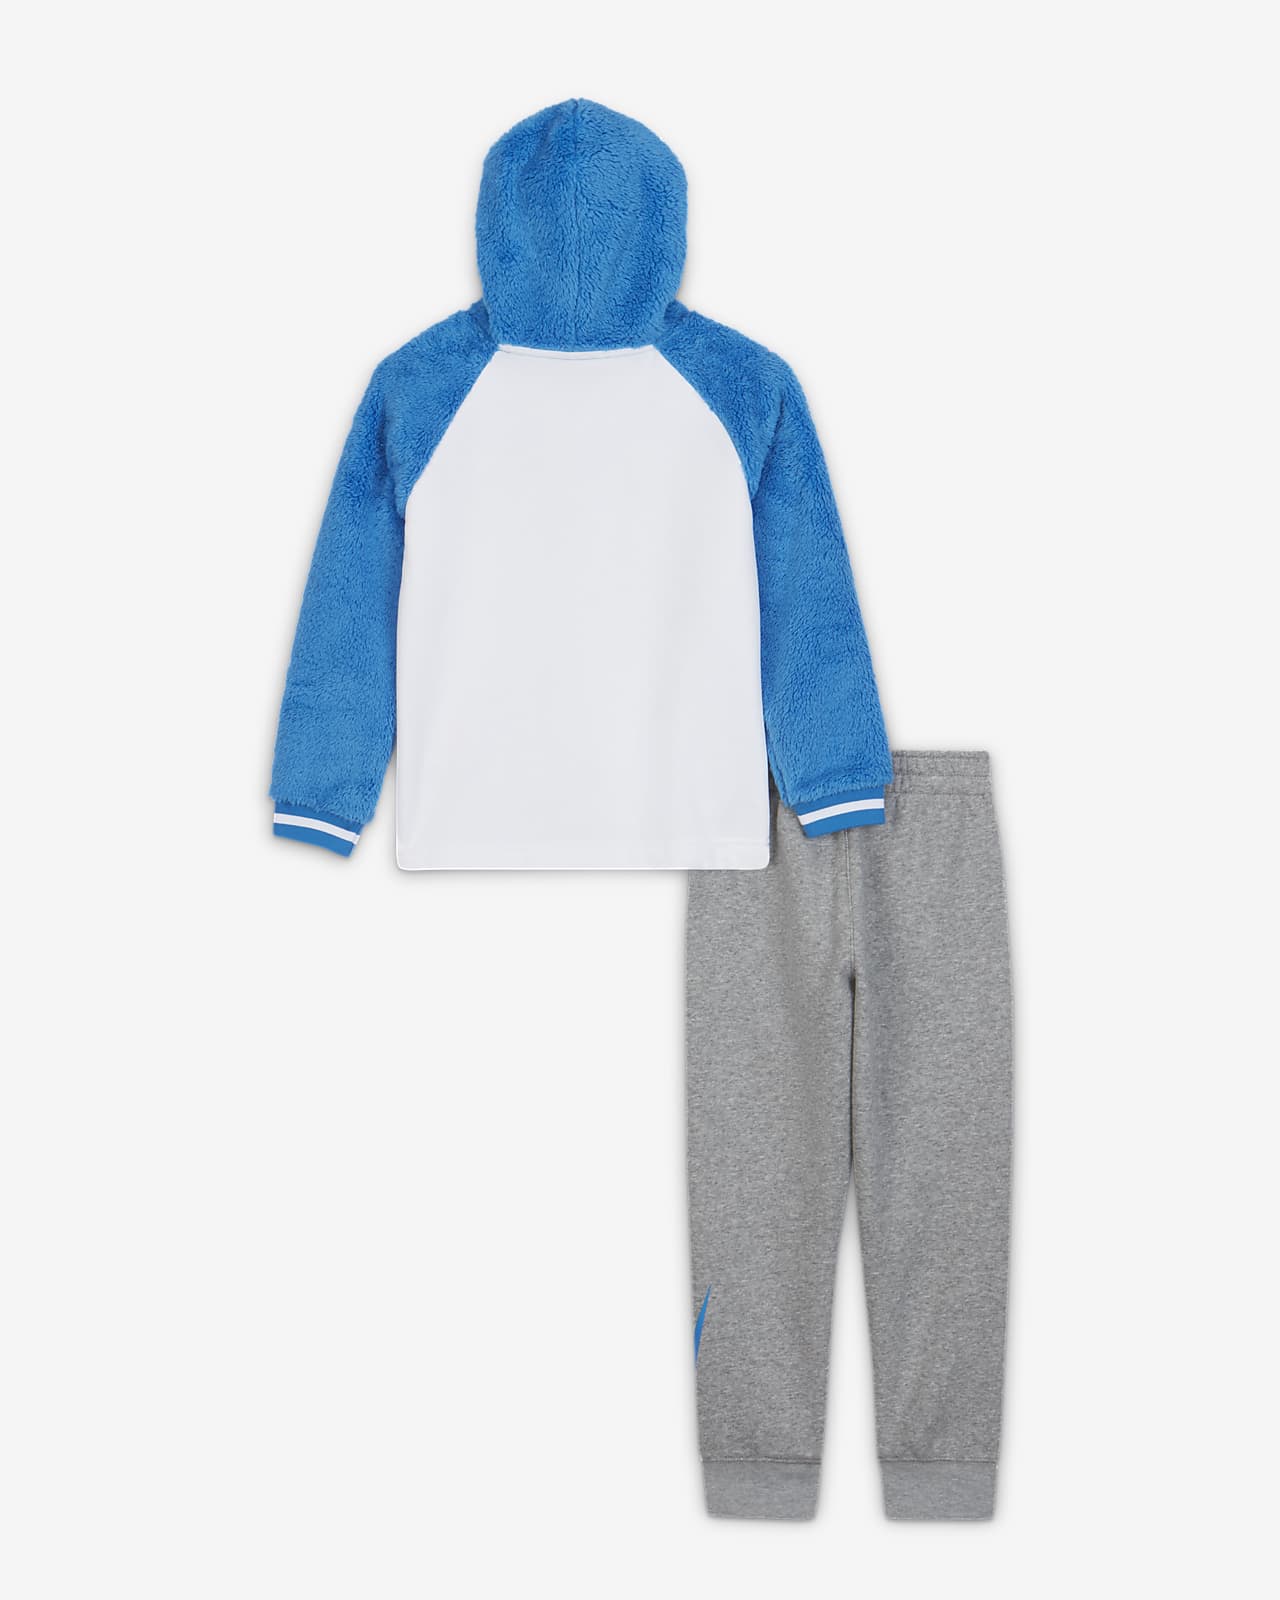 Nike Little Kids' Hoodie and Joggers 